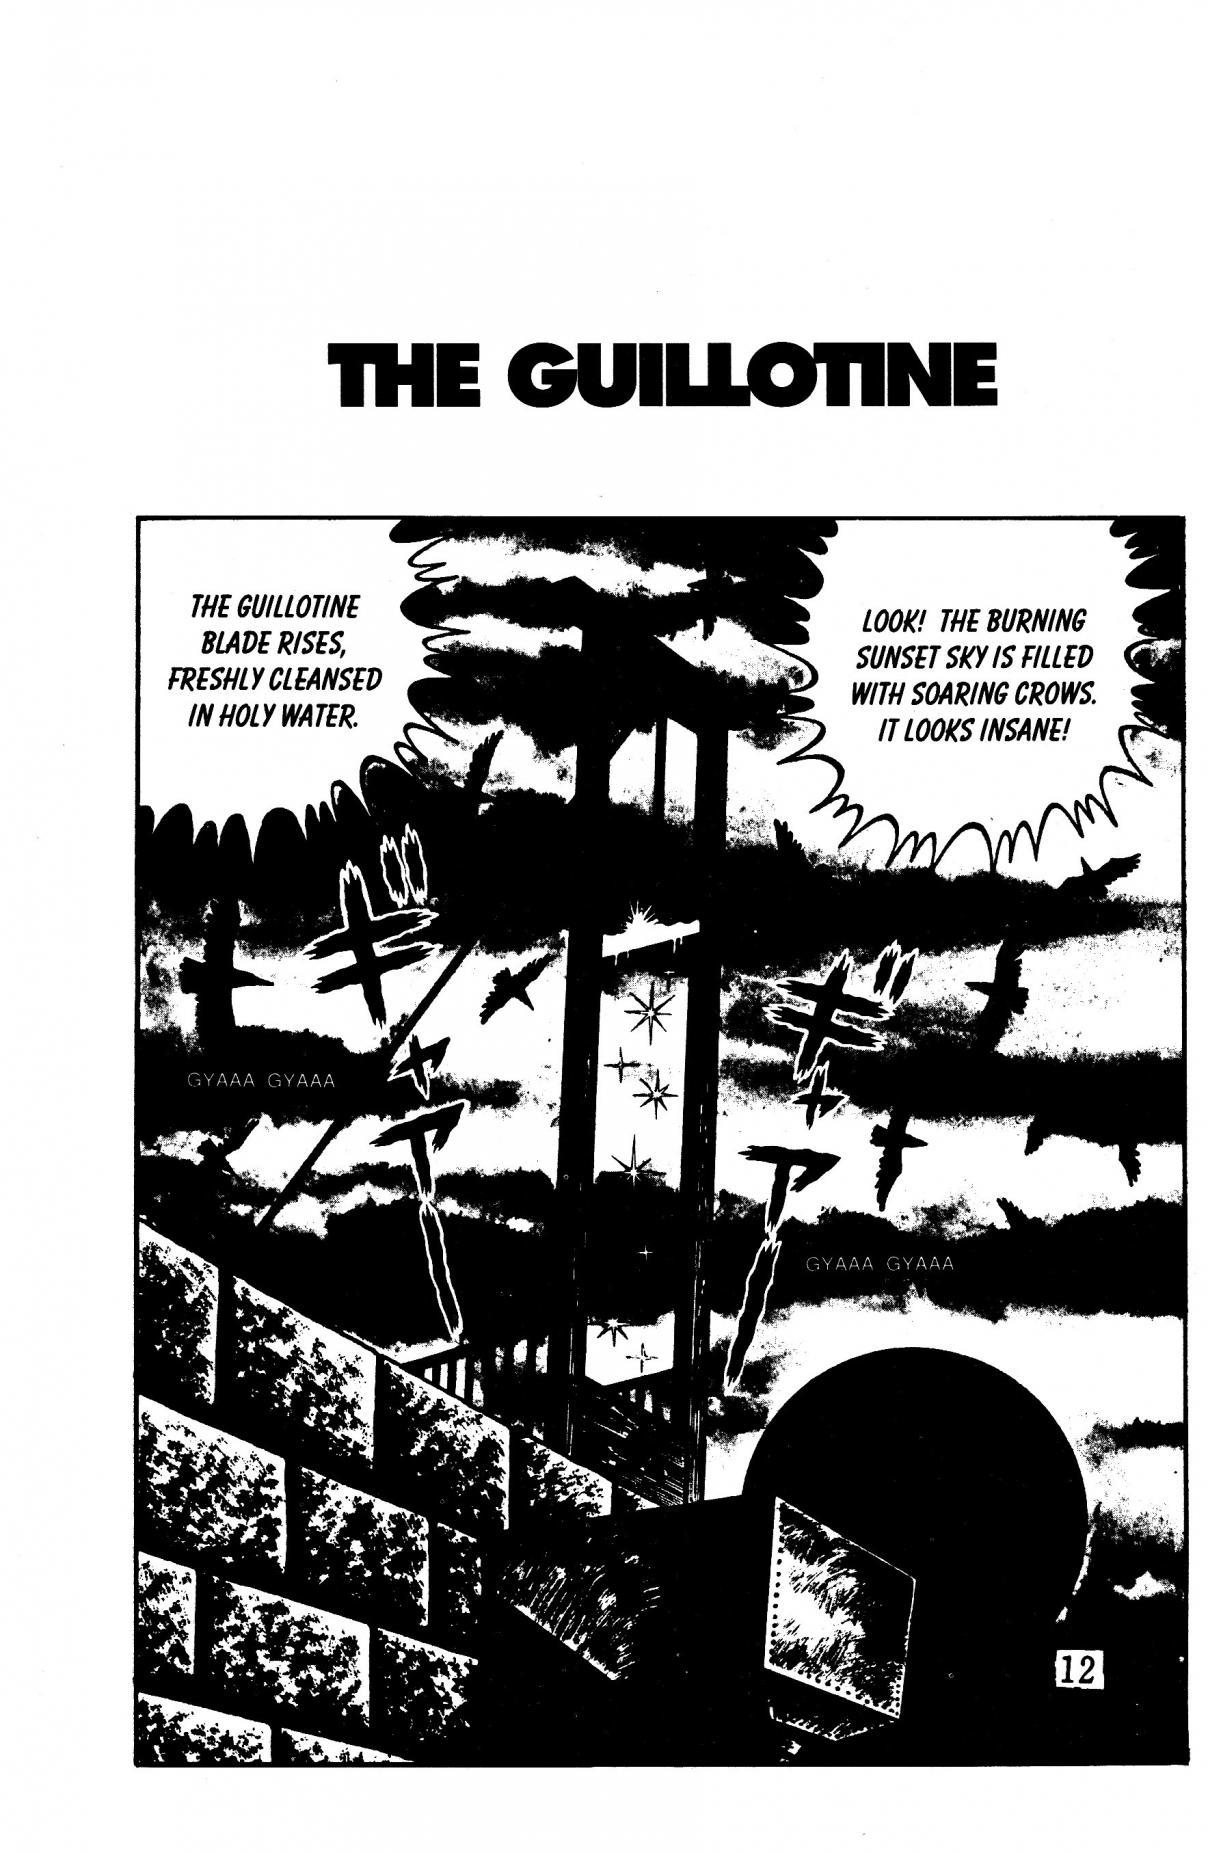 Panorama of Hell Vol. 1 Ch. 1 The Guillotine